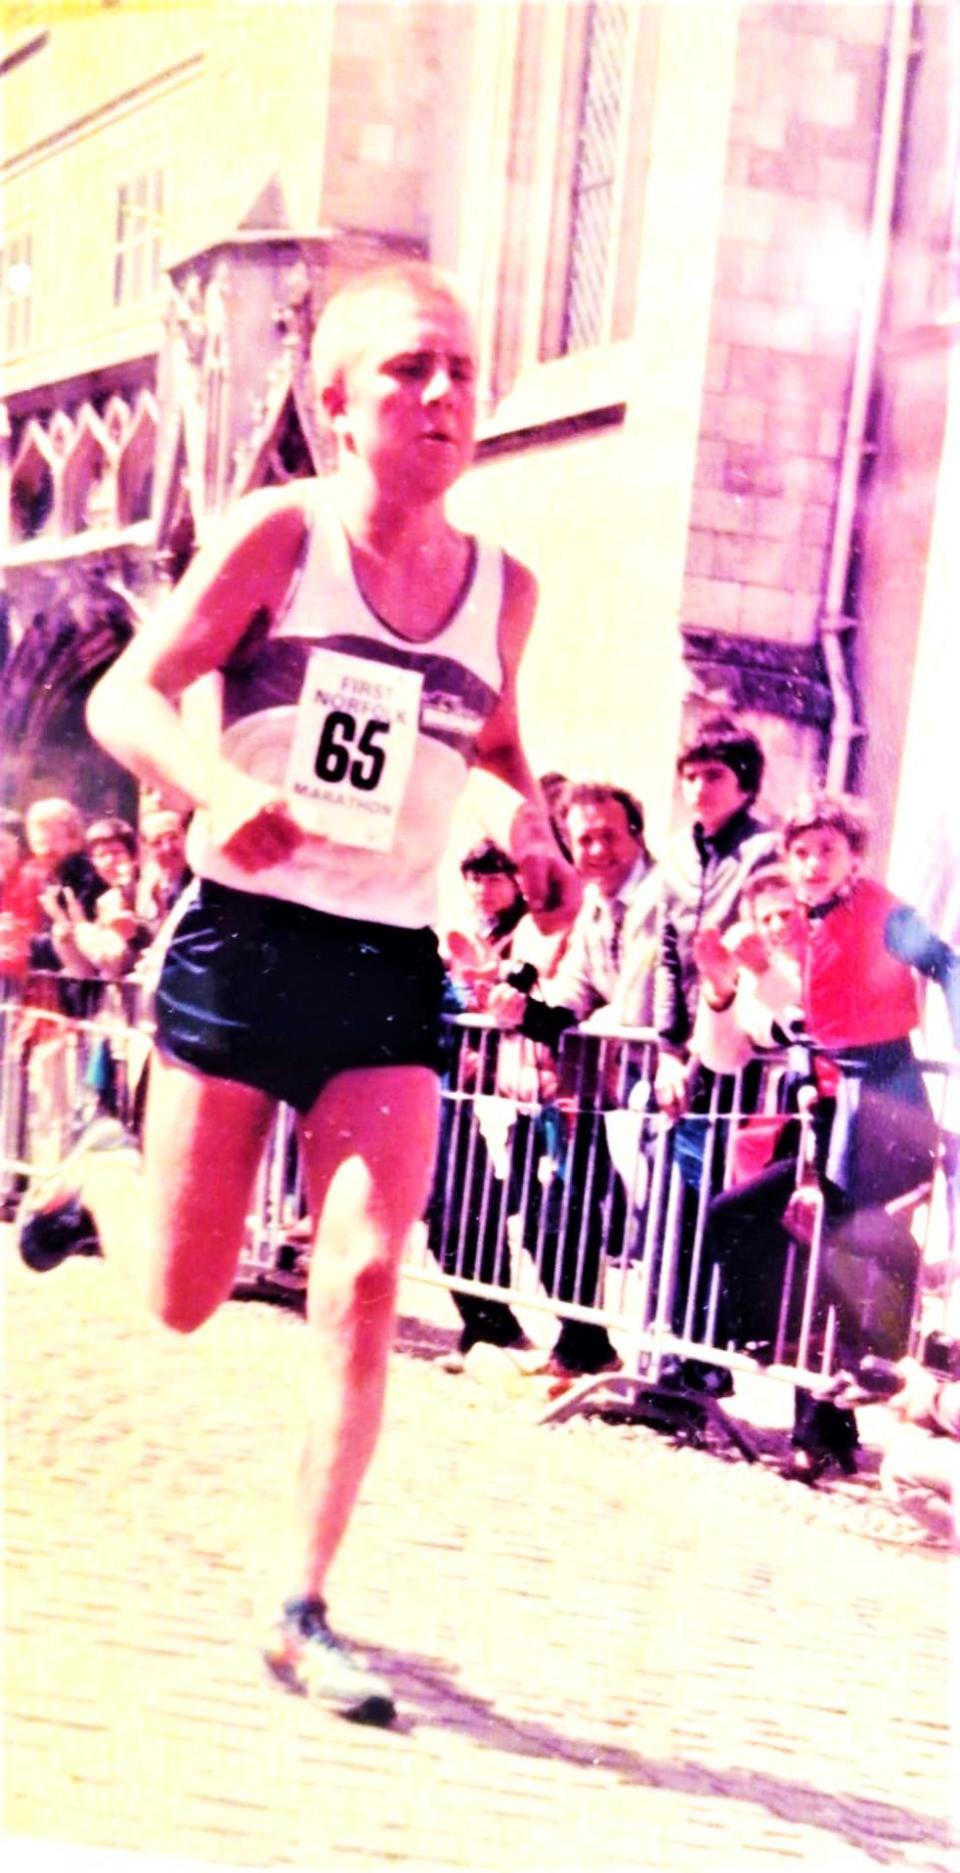 Eastern Daily Press: Dave Mytton finishing the very first Norfolk Marathon in 1982 in 3rd place and in a time of 2 hours